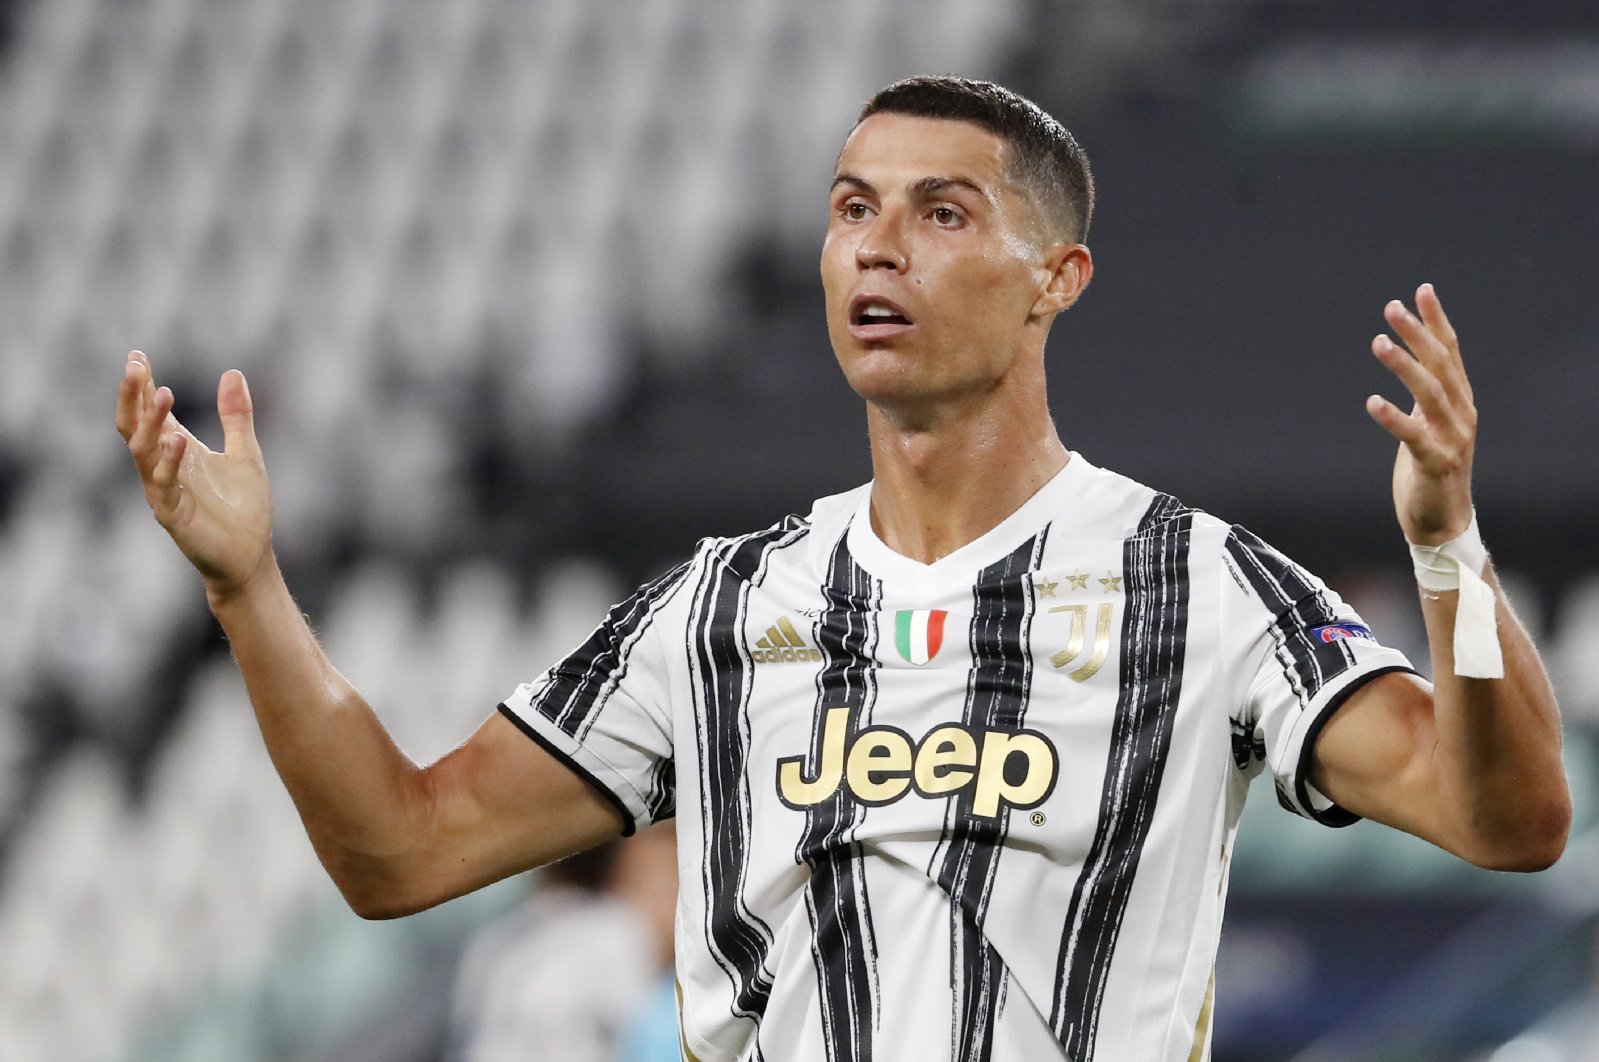 Juventus' Cristiano Ronaldo gestures during a Champions League match against Lyon, in Turin, Italy, Aug. 7, 2020. (AP Photo)